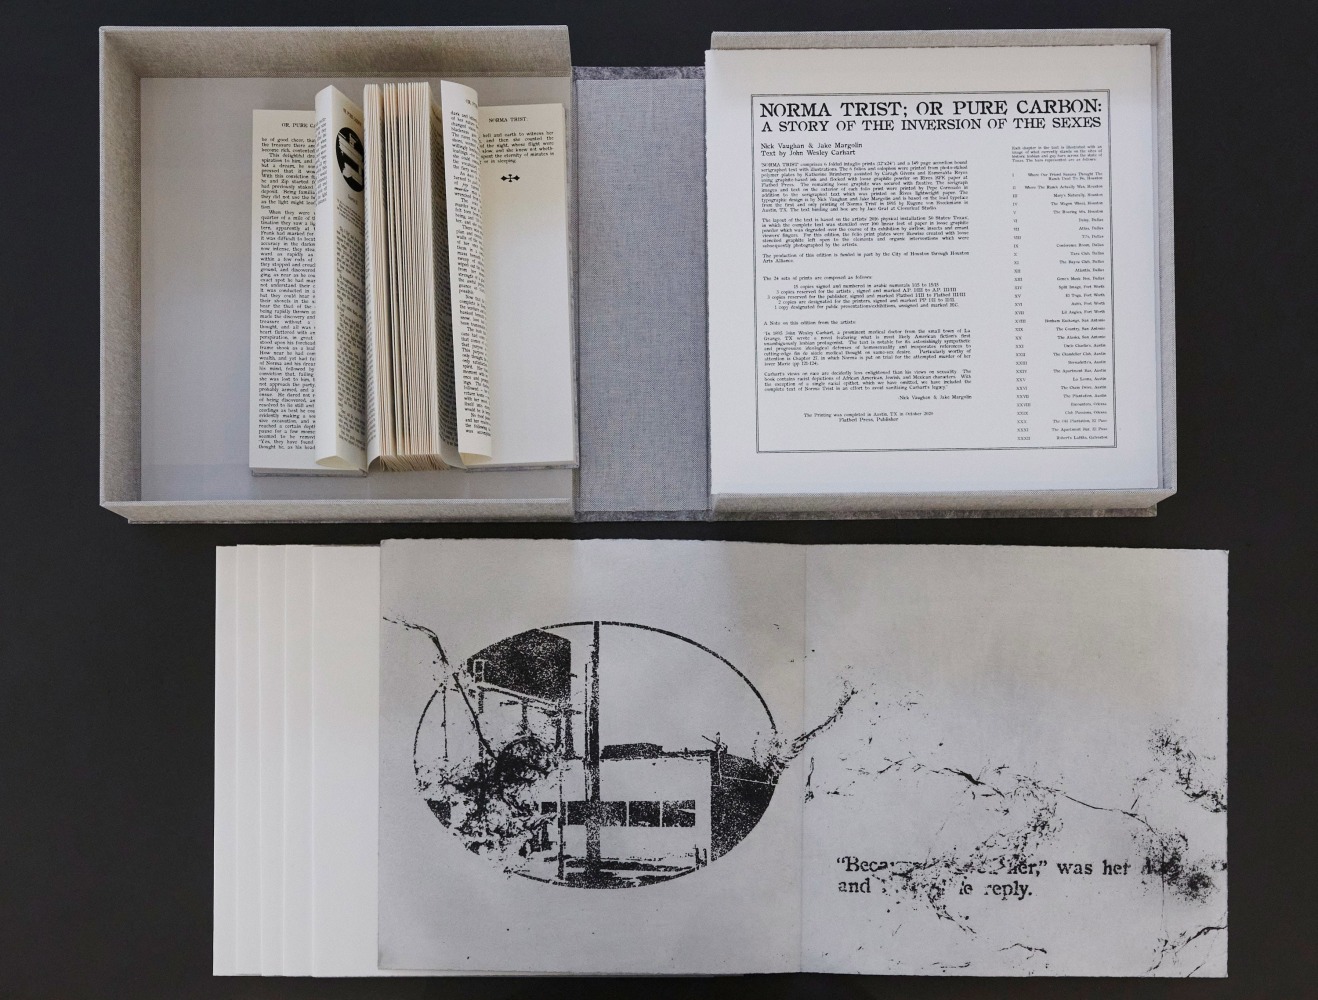 NORMA TRIST; OR PURE CARBON: A STORY OF THE INVERSION OF THE SEXES
Nick Vaughan &amp;amp; Jake Margolin

Livre d&amp;rsquo;artiste
Folios: Screen print exterior, photo etching with flocking interior
Colophon: photo etching
Book: Screen printed text

Portfolio clam-shell box: 12 1&amp;frasl;2&amp;rdquo; x 12 1&amp;frasl;2&amp;rdquo; x 4 1&amp;frasl;2&amp;rdquo;
Folios: 12&amp;rdquo; x 24&amp;rdquo; open, 12&amp;rdquo; x 12&amp;rdquo; closed
Accordian book 10&amp;rdquo; x 532&amp;rdquo; unfolded
Edition of 15

The 6 folio plates were printed from photo-etched polymer plates by Katherine Brimberry using graphite based ink and flocked with loose graphite powder on Rives BFK paper at Flatbed Press. The serigraphed text was printed by Pepe Coronado on Rives lightweight paper. The typographic design is by Nick Vaughan and Jake&amp;nbsp;Margolin

Printed by Katherine Brimberry,&amp;nbsp;text binding and&amp;nbsp;box&amp;nbsp;by Kaoru Y. Perry at Cloverleaf Studio, Published by Flatbed Press

PURCHASE